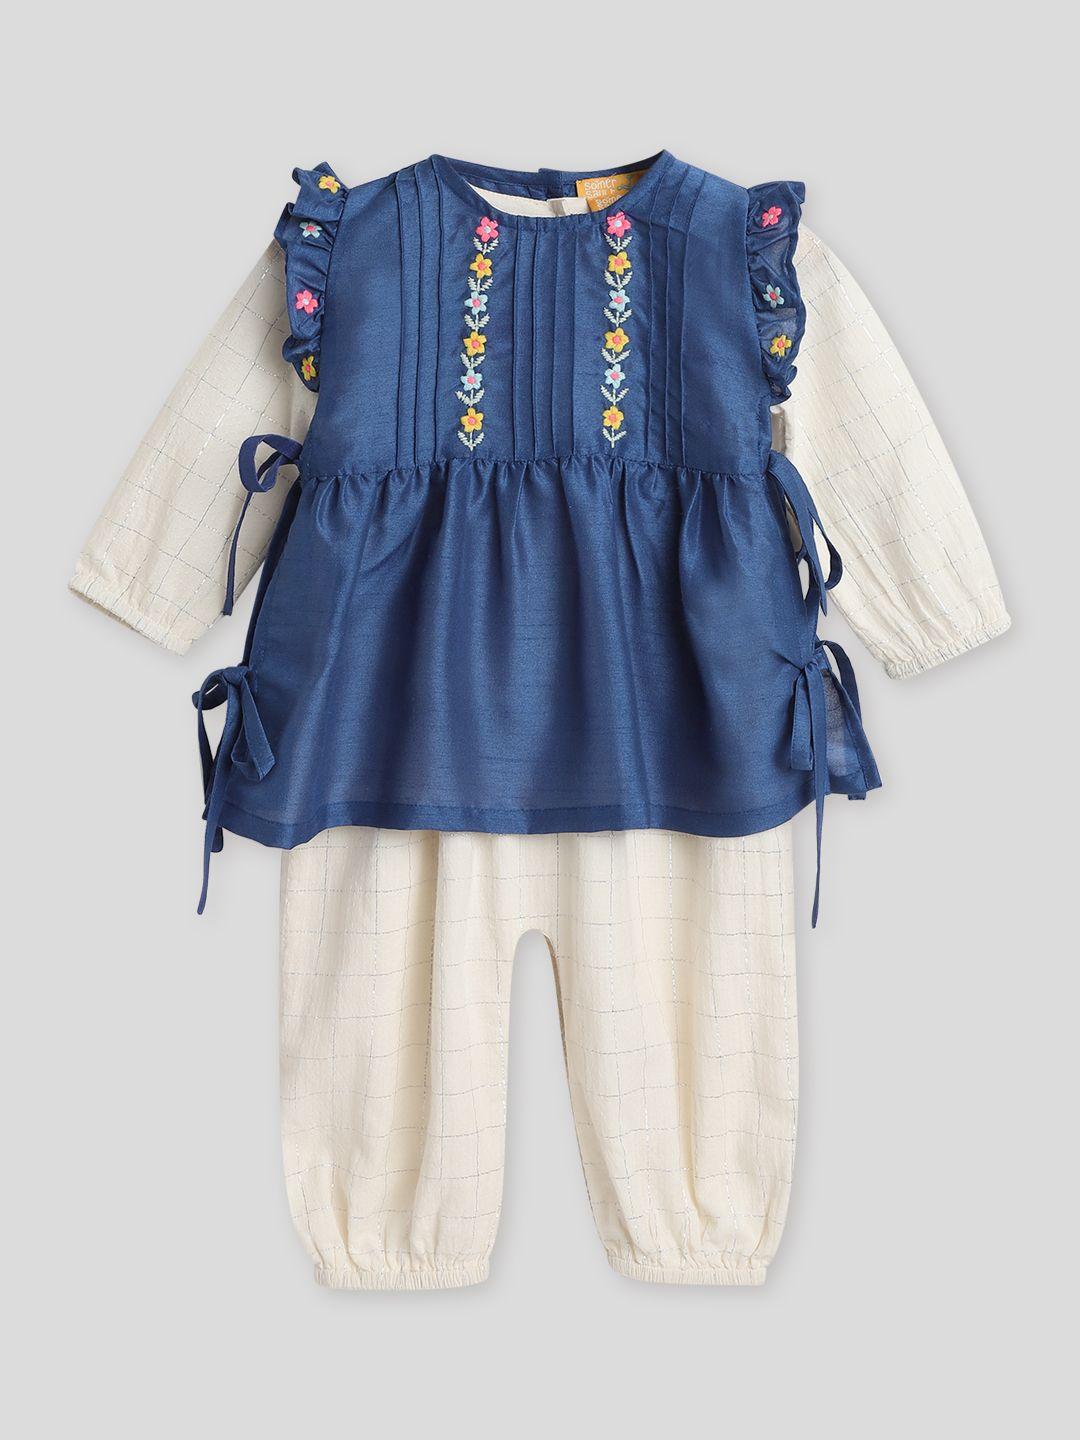 somersault-infants-girls-embroidered-romper-with-apron-dress